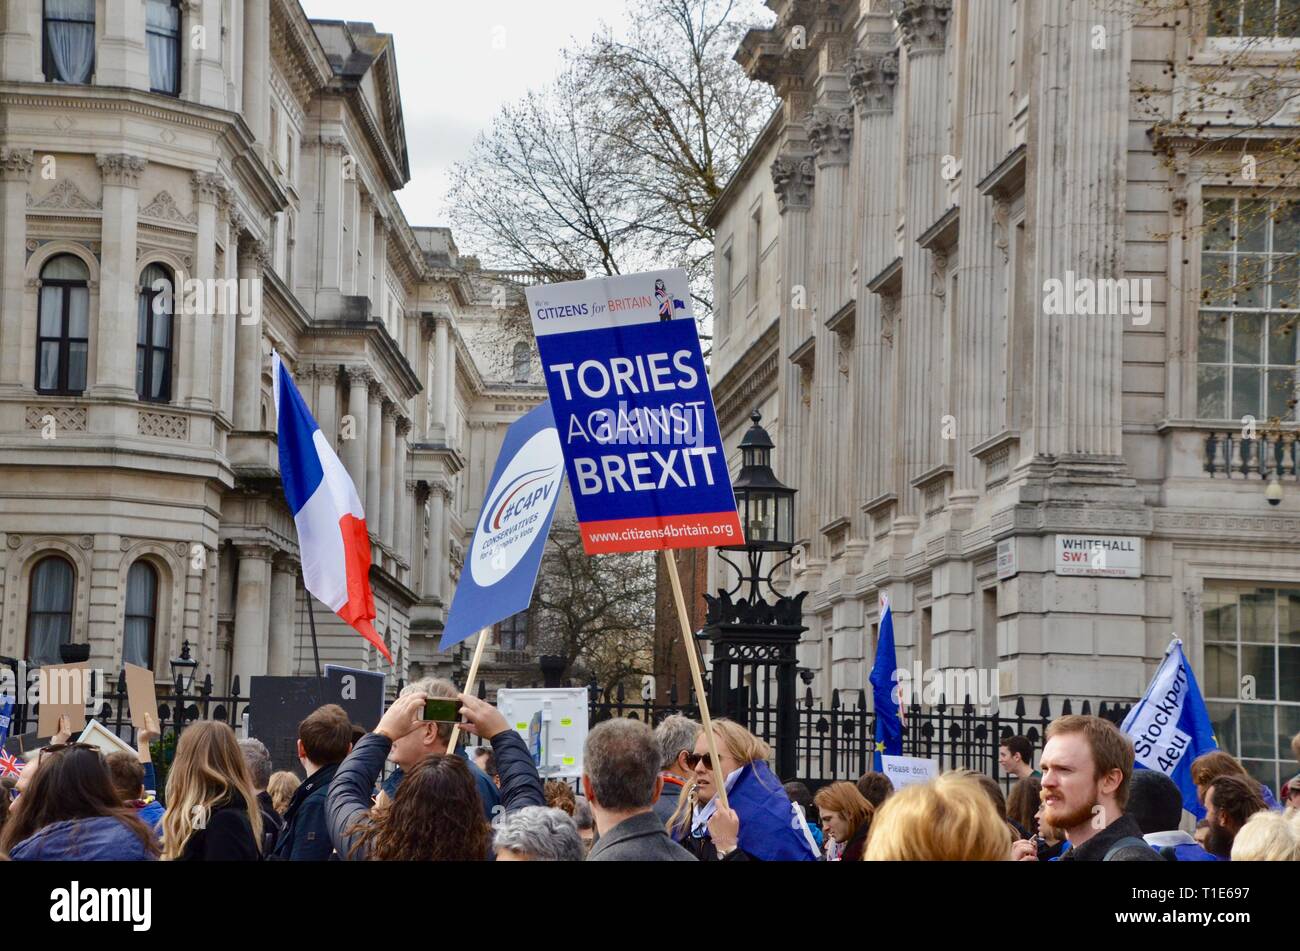 scenes from the anti brexit pro peoples vote march in london 23rd march 2019 tories against brexit Stock Photo